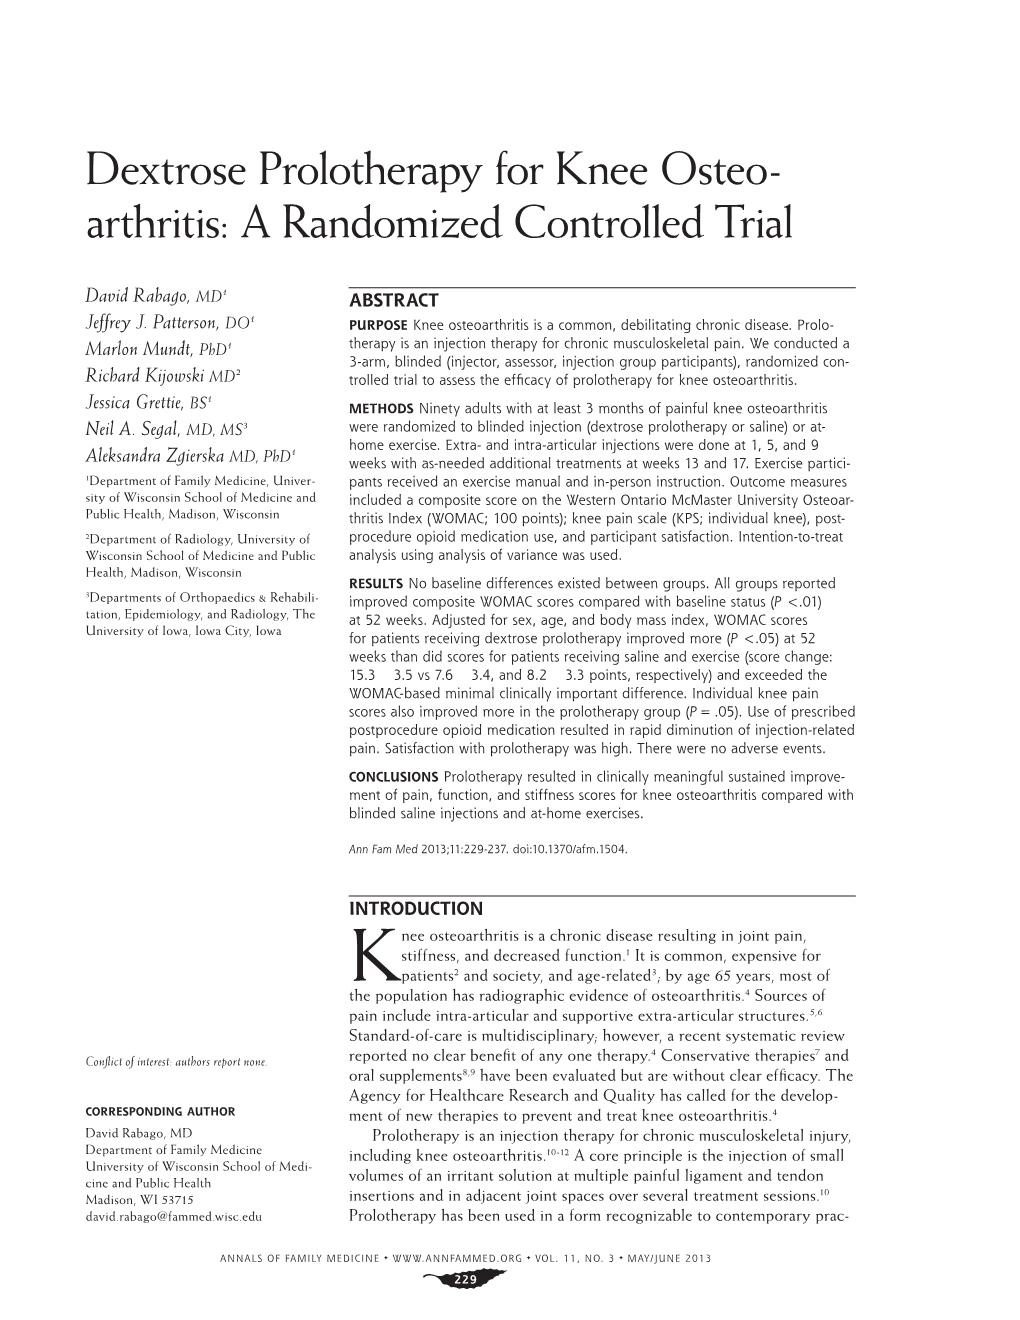 Dextrose Prolotherapy for Knee Osteo- Arthritis: a Randomized Controlled Trial